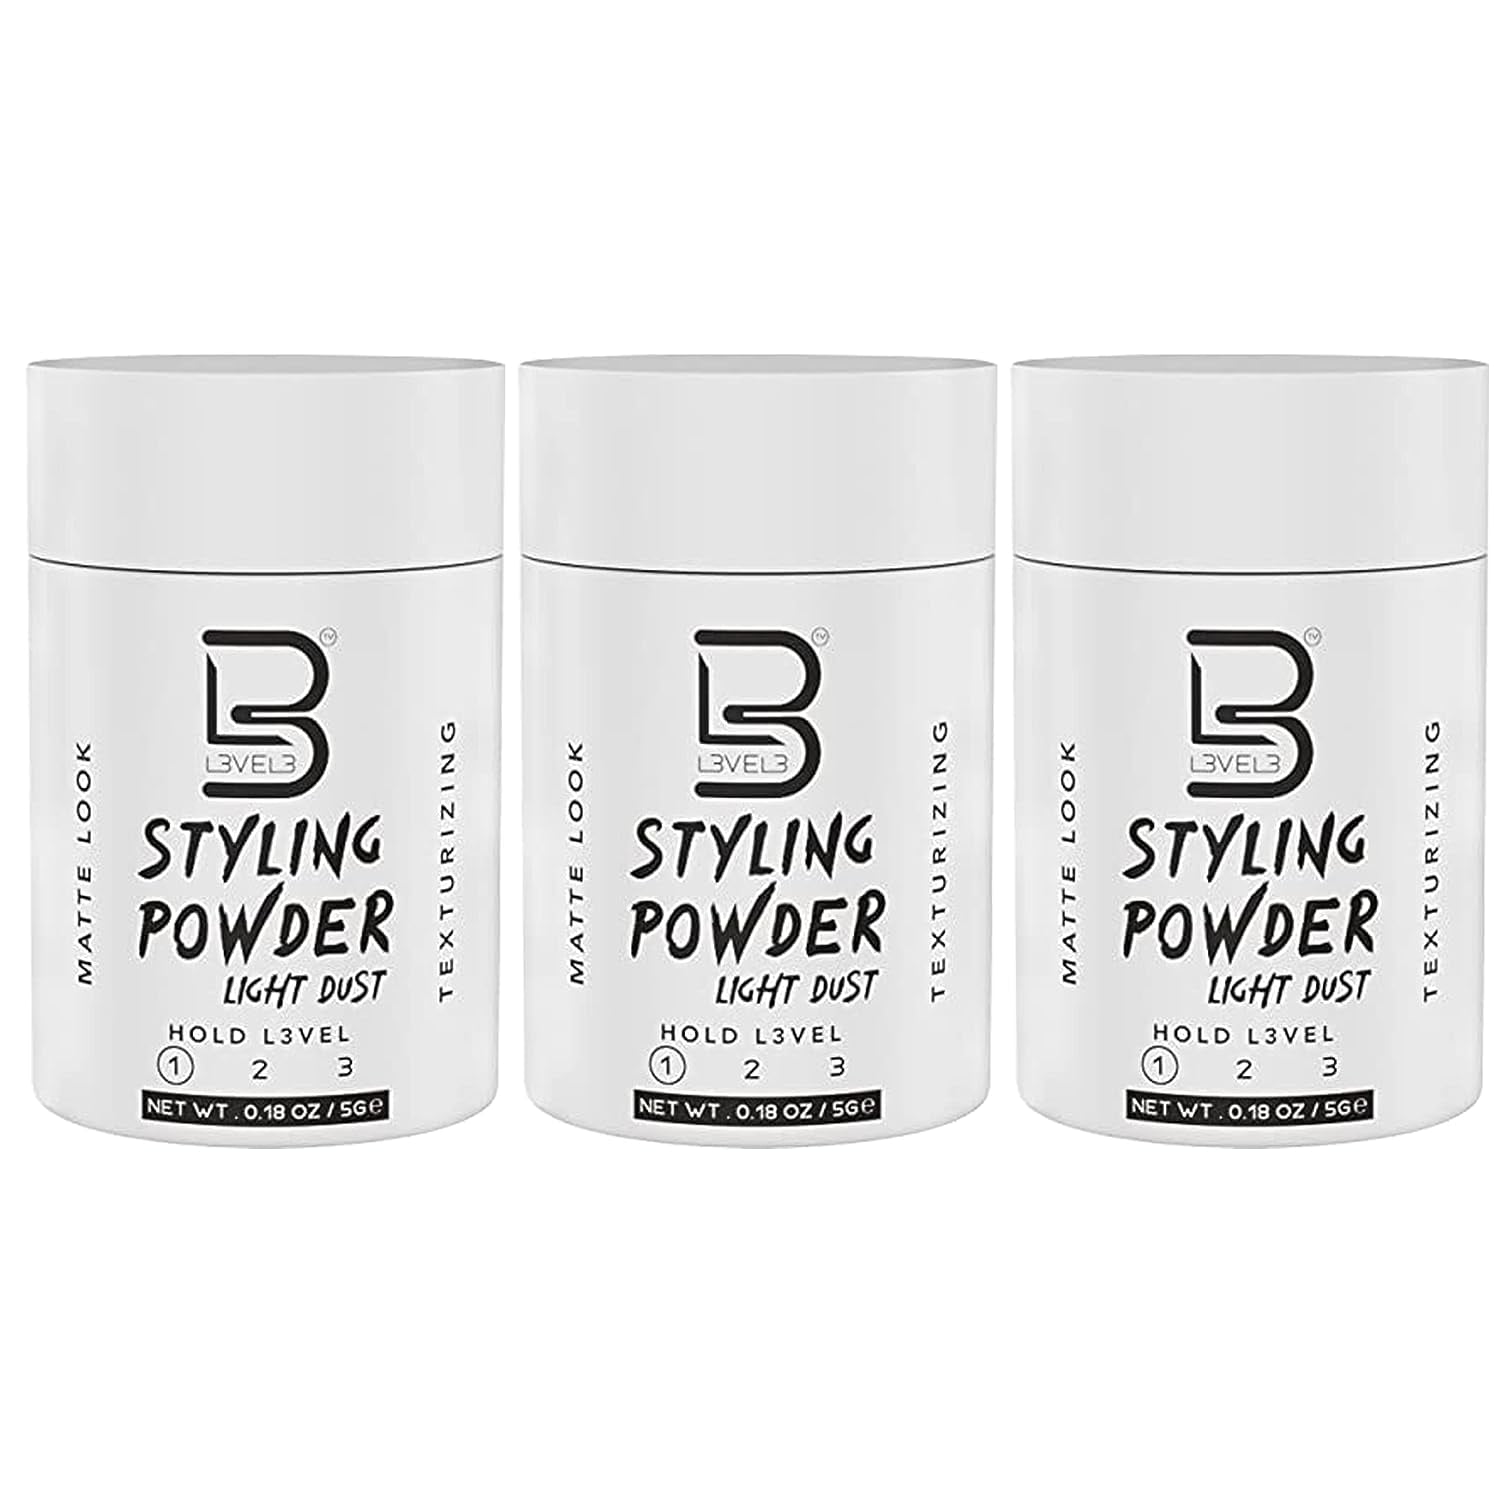 L3 Level 3 Travel Styling Powder - Natural Look Mens Powder - Sample Styling Powder, Men's, Size: One Size